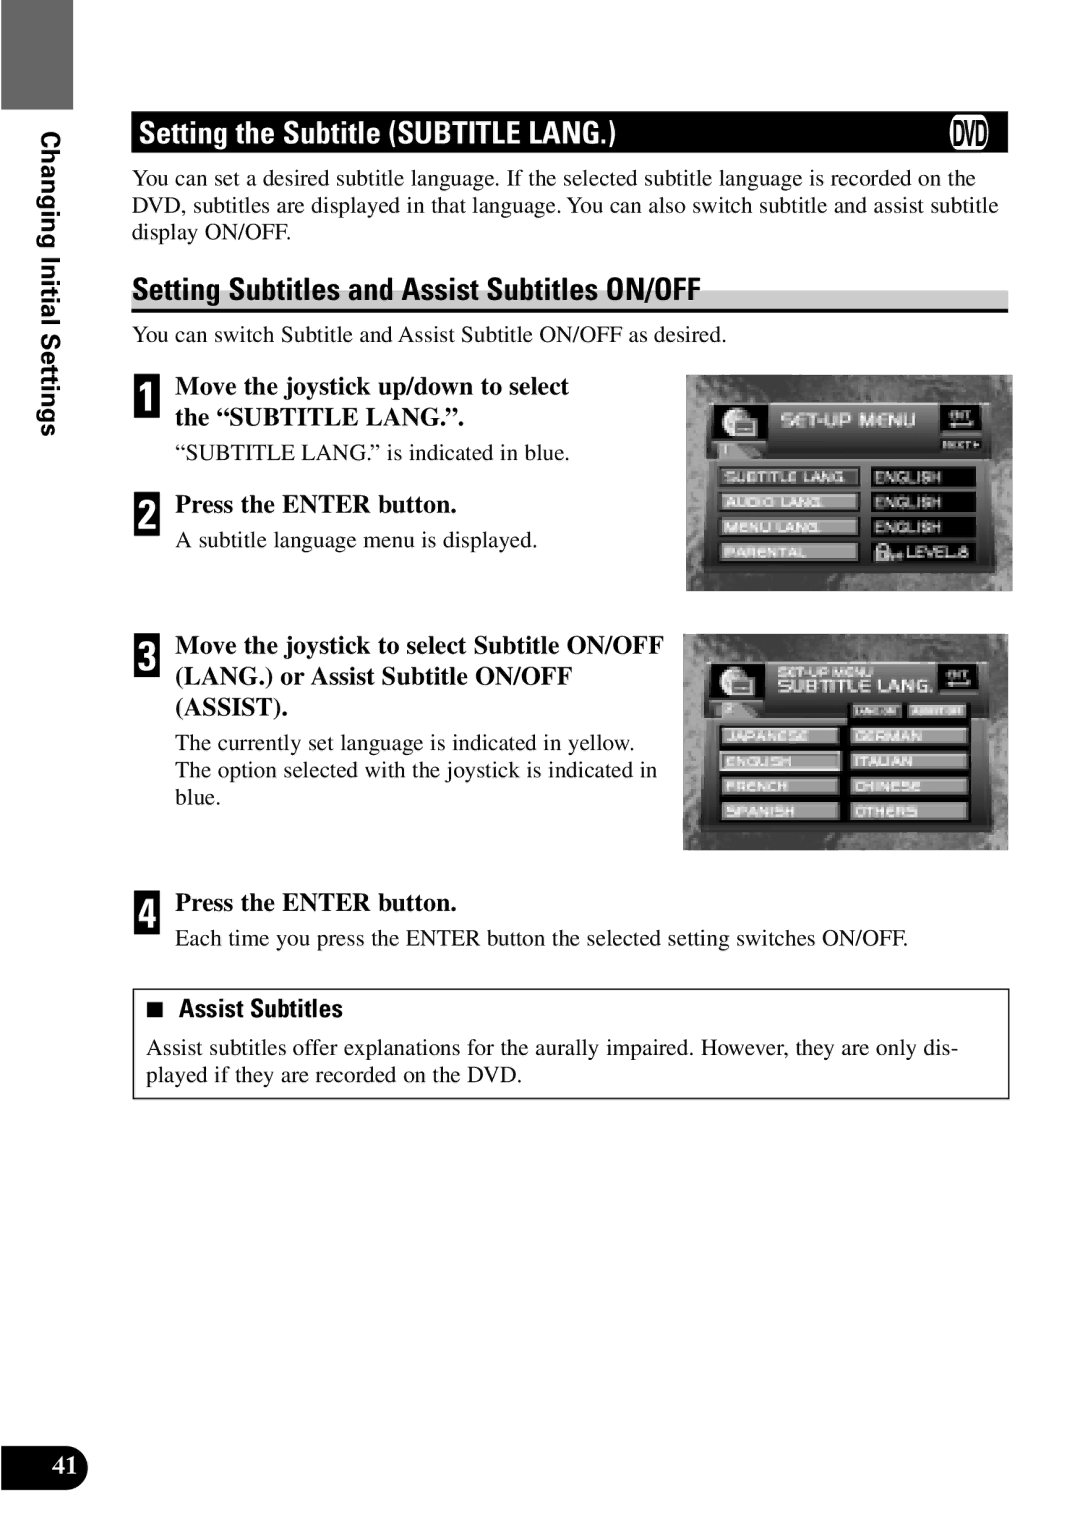 Pioneer XDV-P9 owner manual Setting the Subtitle Subtitle Lang, Setting Subtitles and Assist Subtitles ON/OFF 